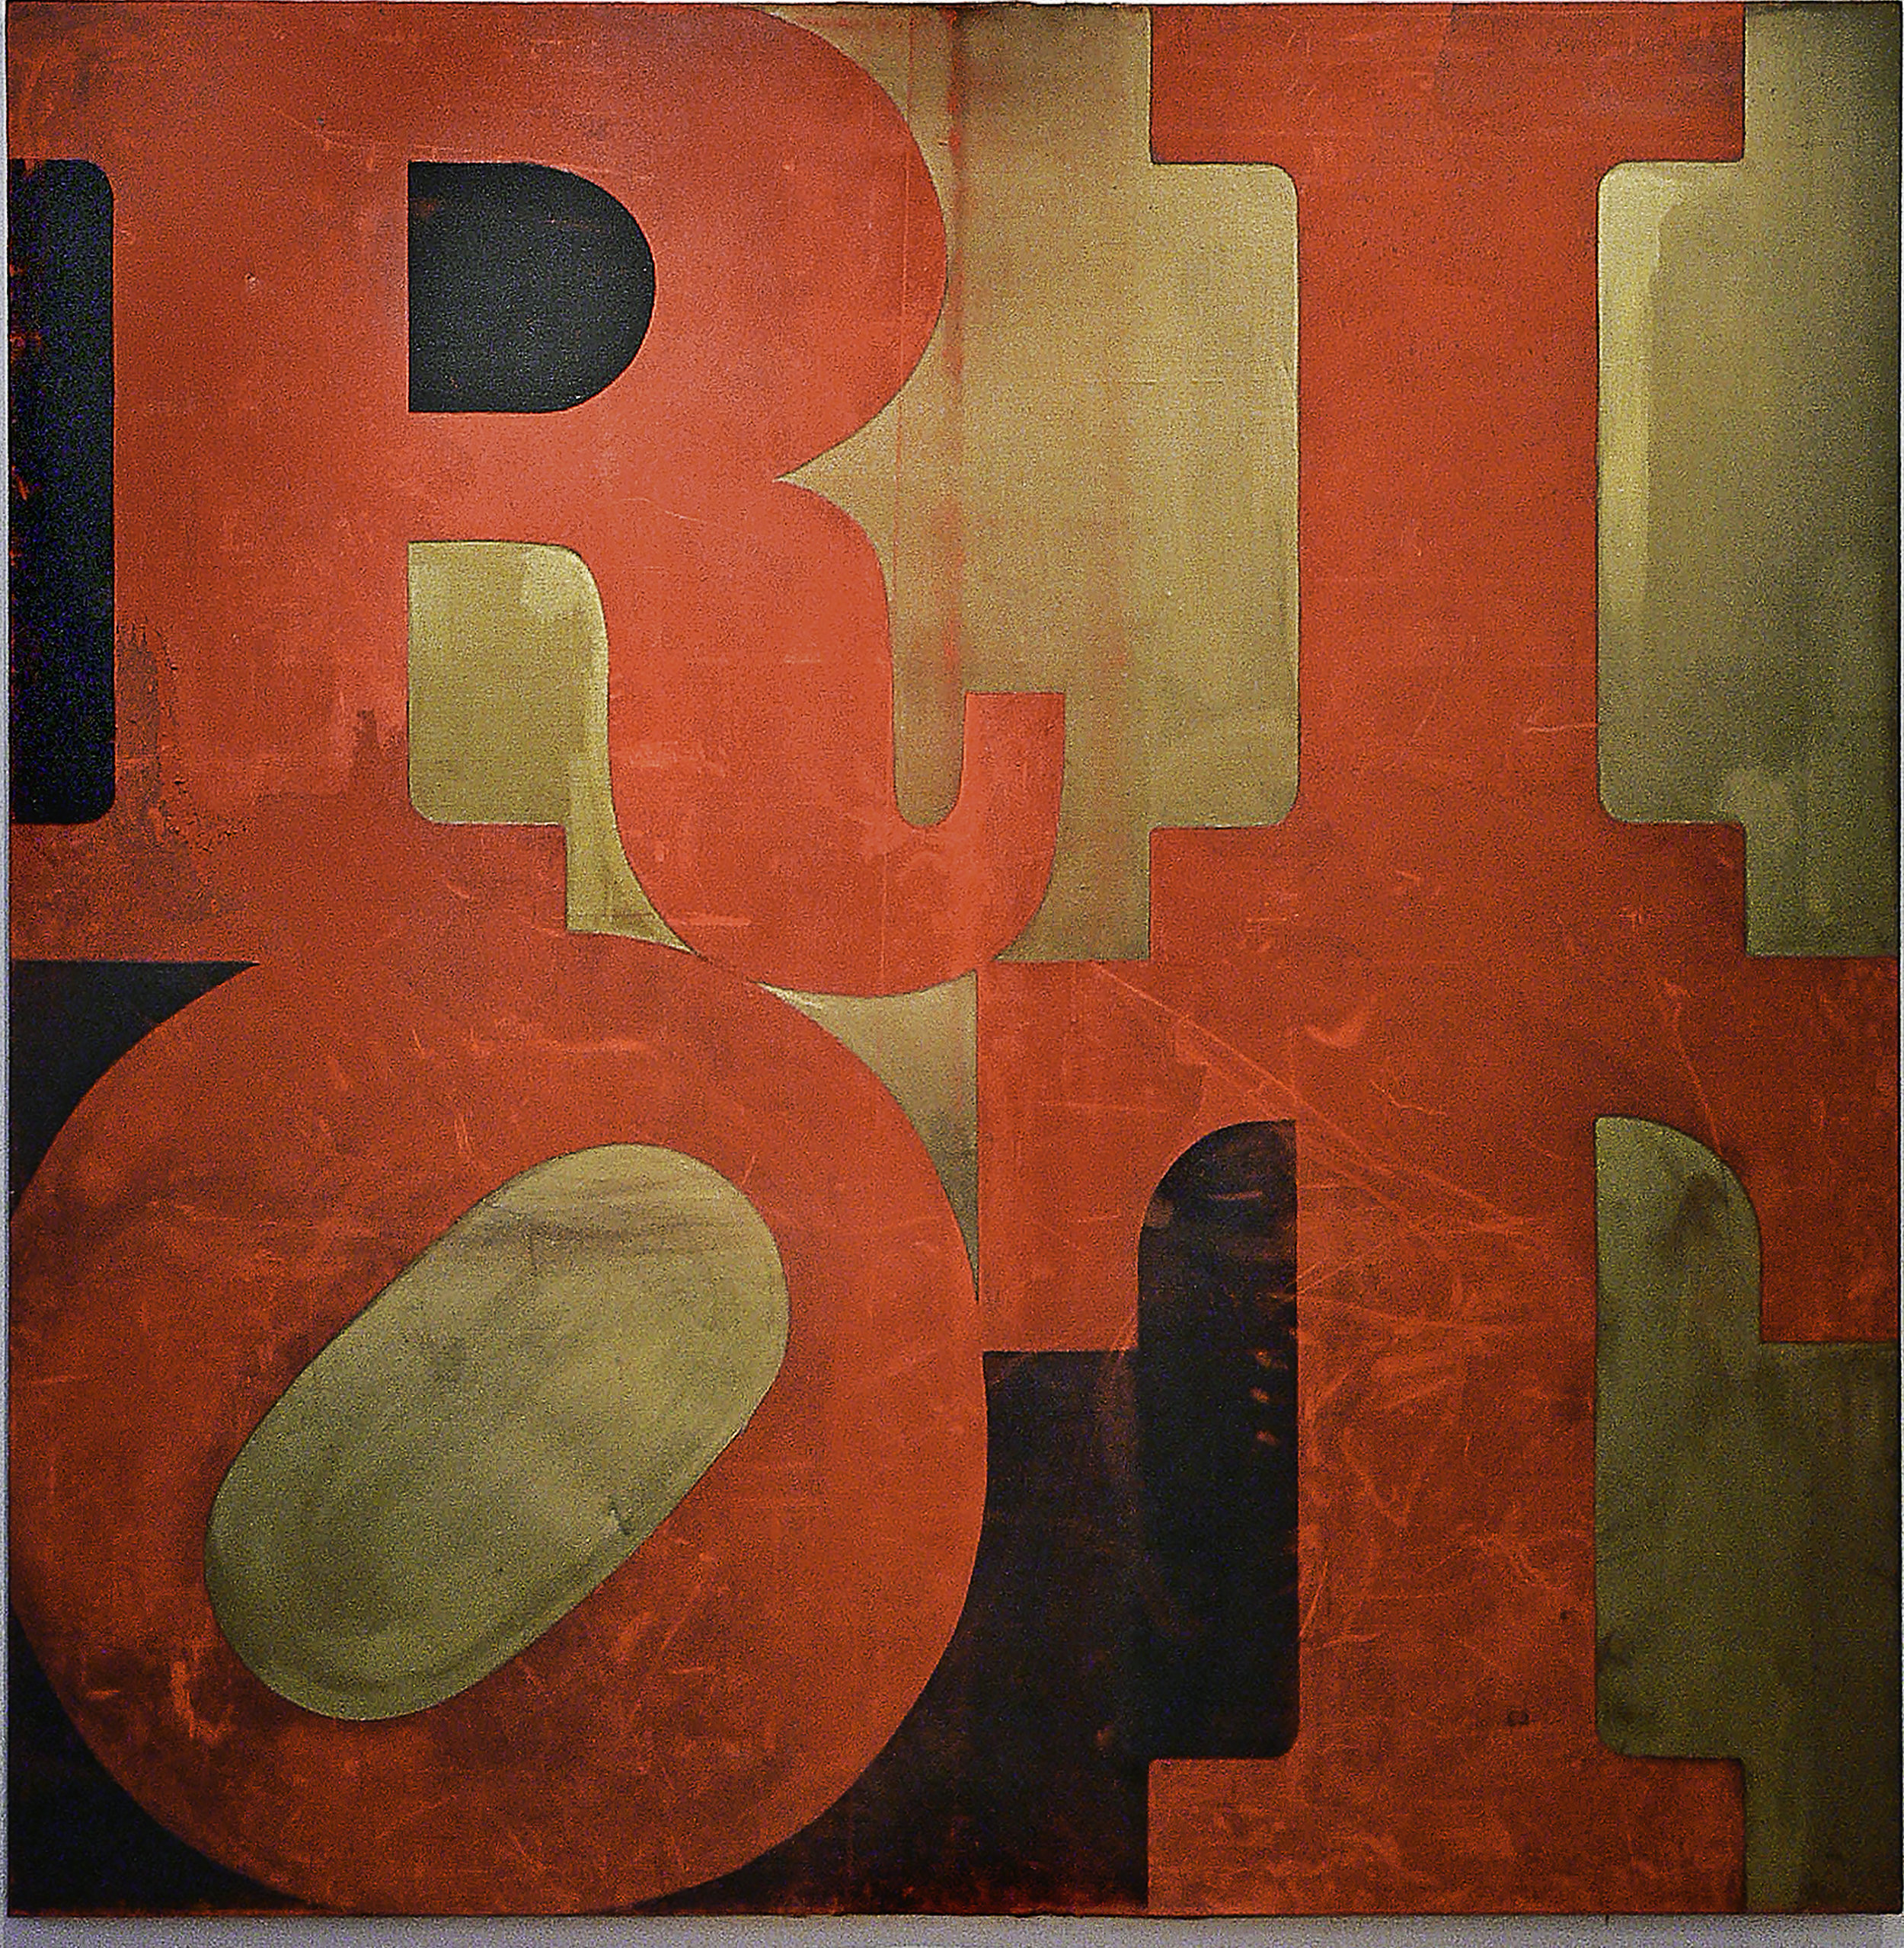 A painting from the AIDS activist group Gran Fury, parodying the famous "LOVE" artworks by artist Robert Indiana. Bold capital letters are arranged in a square, with "RI" at top resting on "OT." The "O" is tilted to the right.